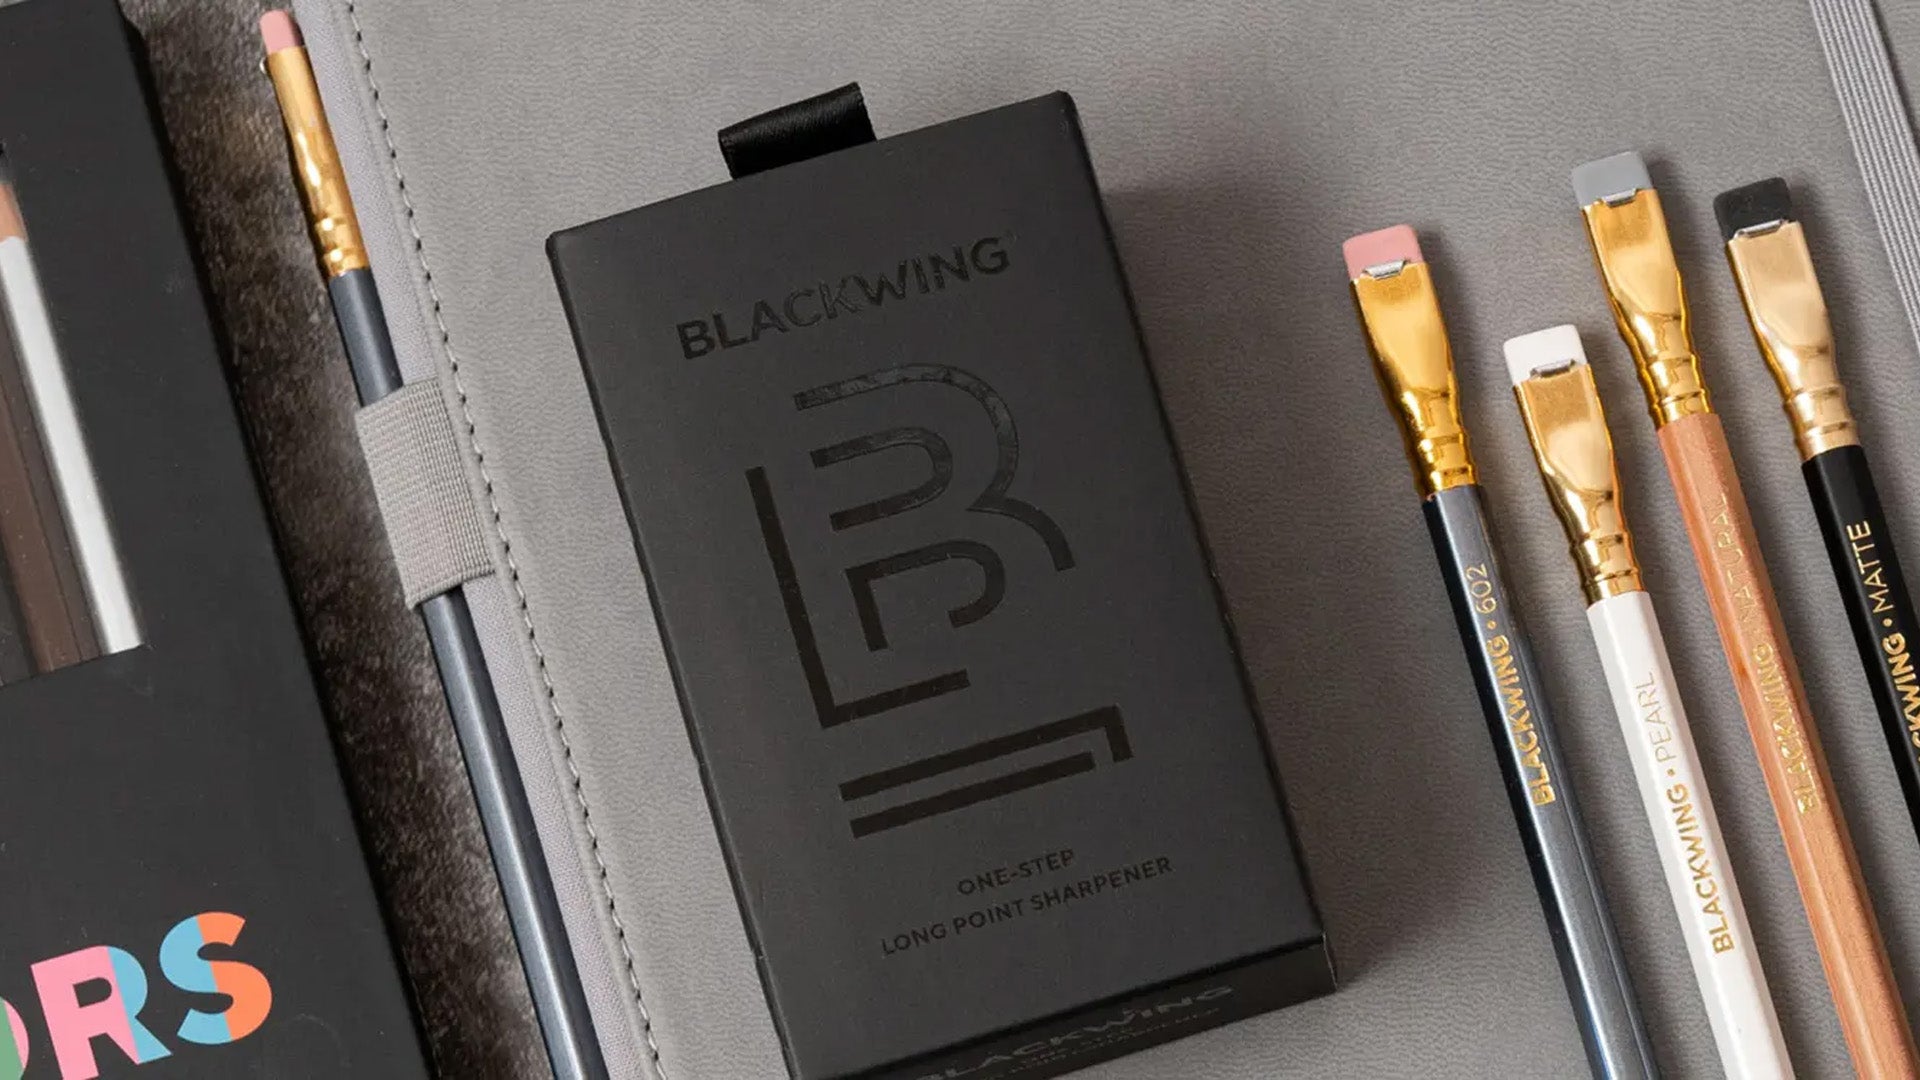 Blackwing pencils and tools for a balanced life